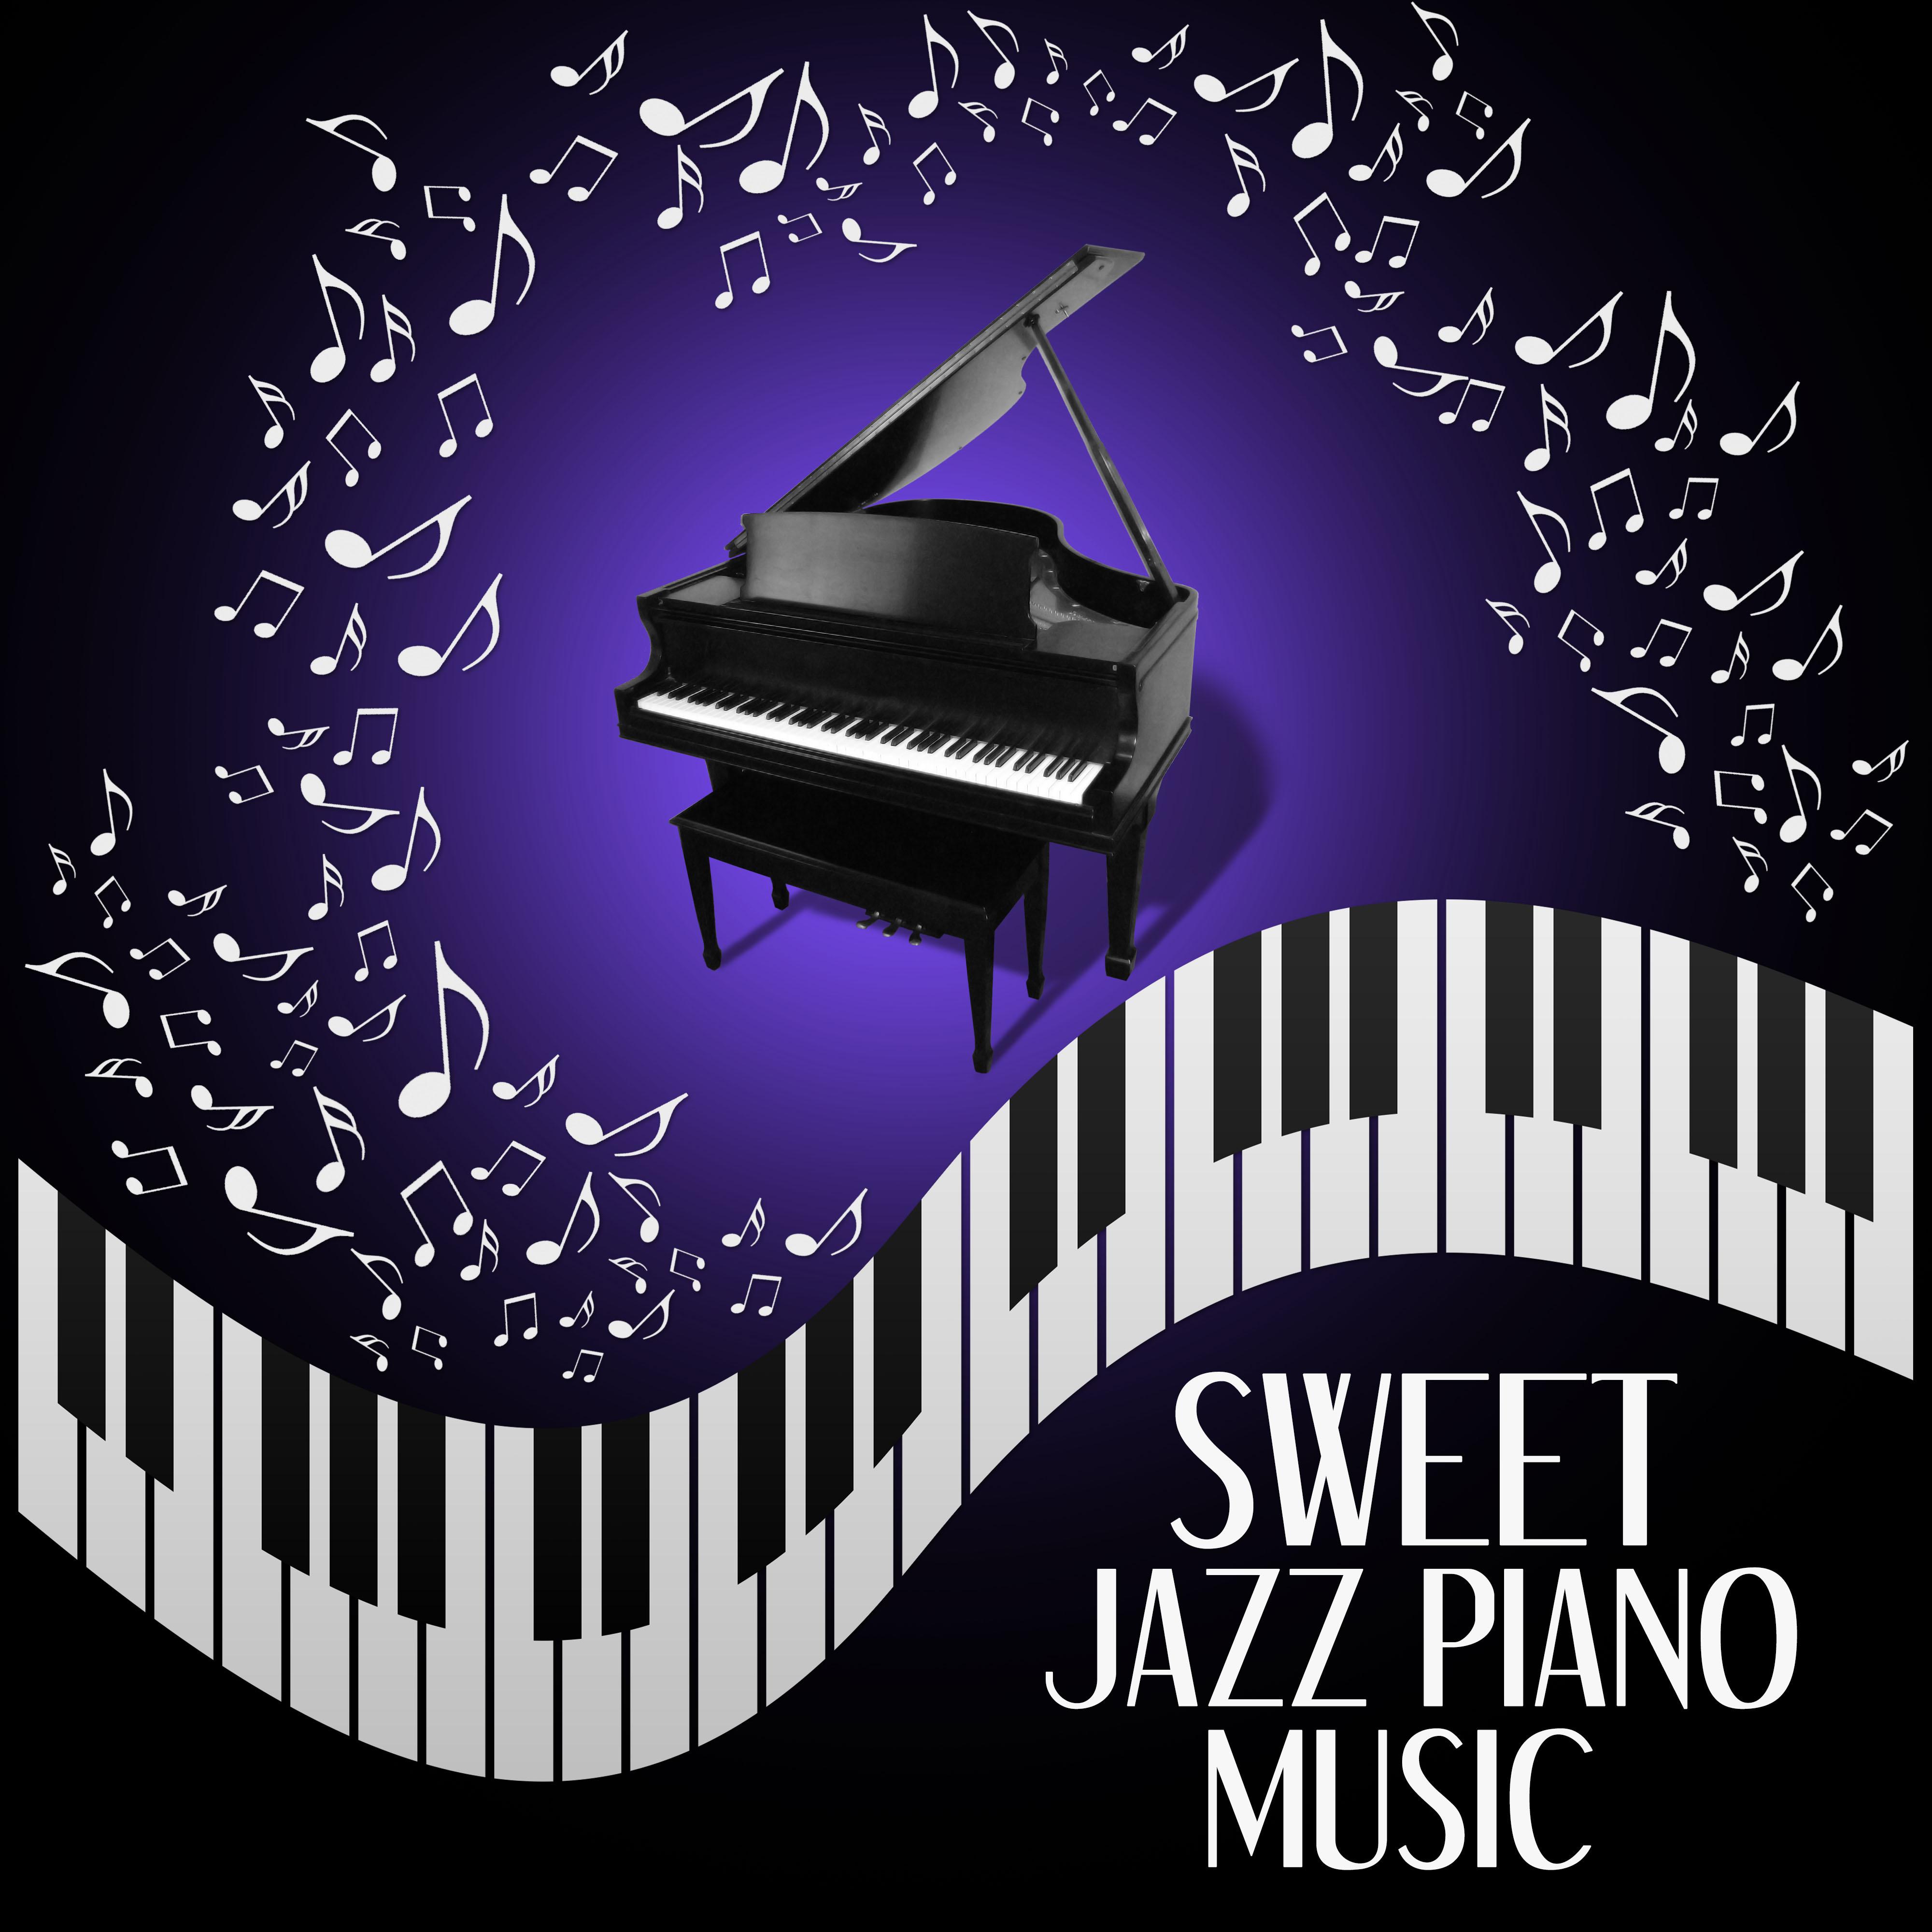 Sweet Jazz Piano Music – Jazz for Everyone, Chill Jazz, Piano Sounds, Soothing Piano Sounds, Background Music